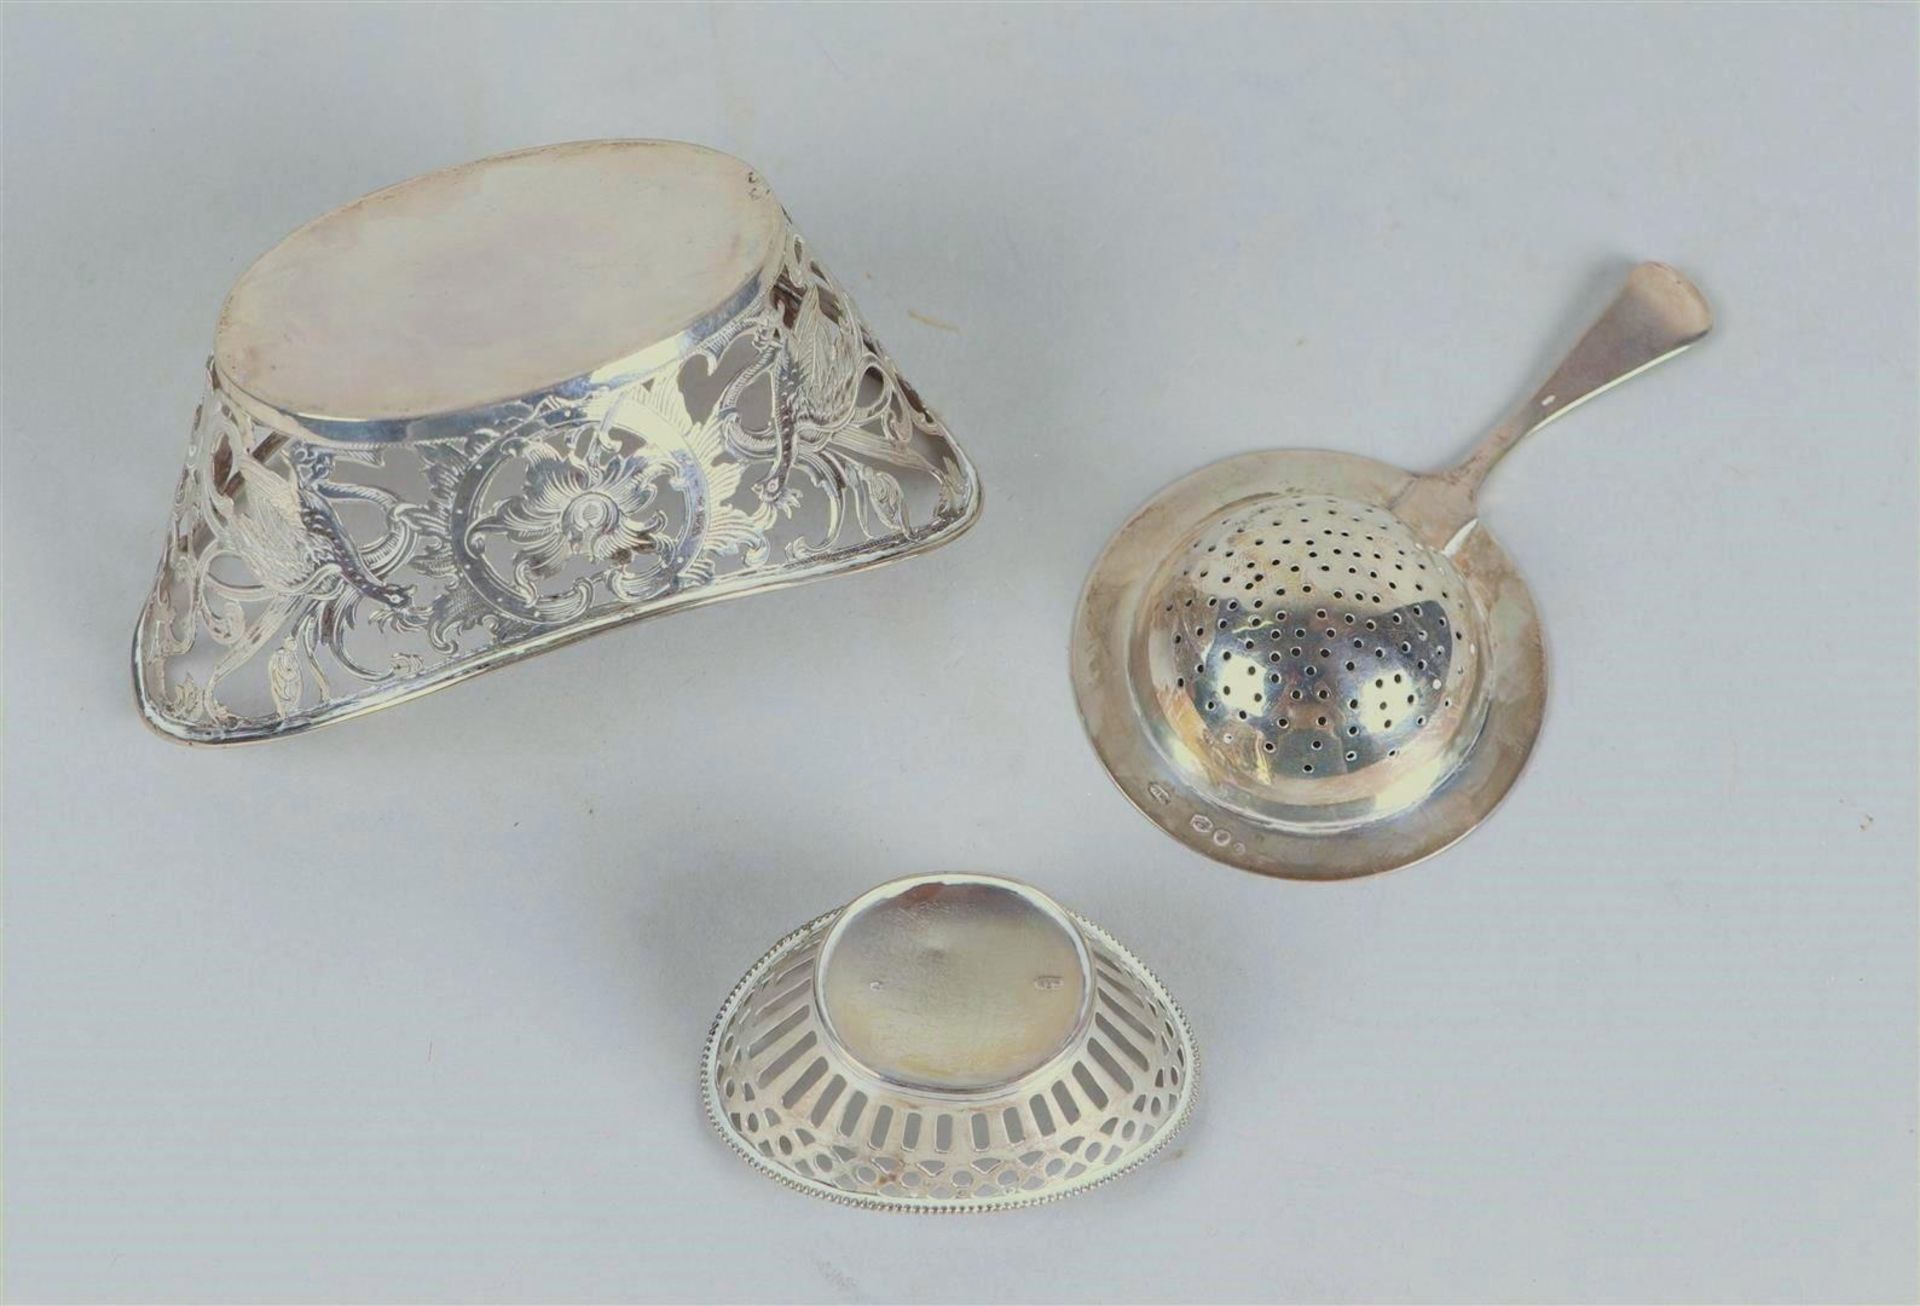 Silver openwork bonbon tray 3rd amount, a dragee tray with pearl rim and a tea strainer  - Image 2 of 5